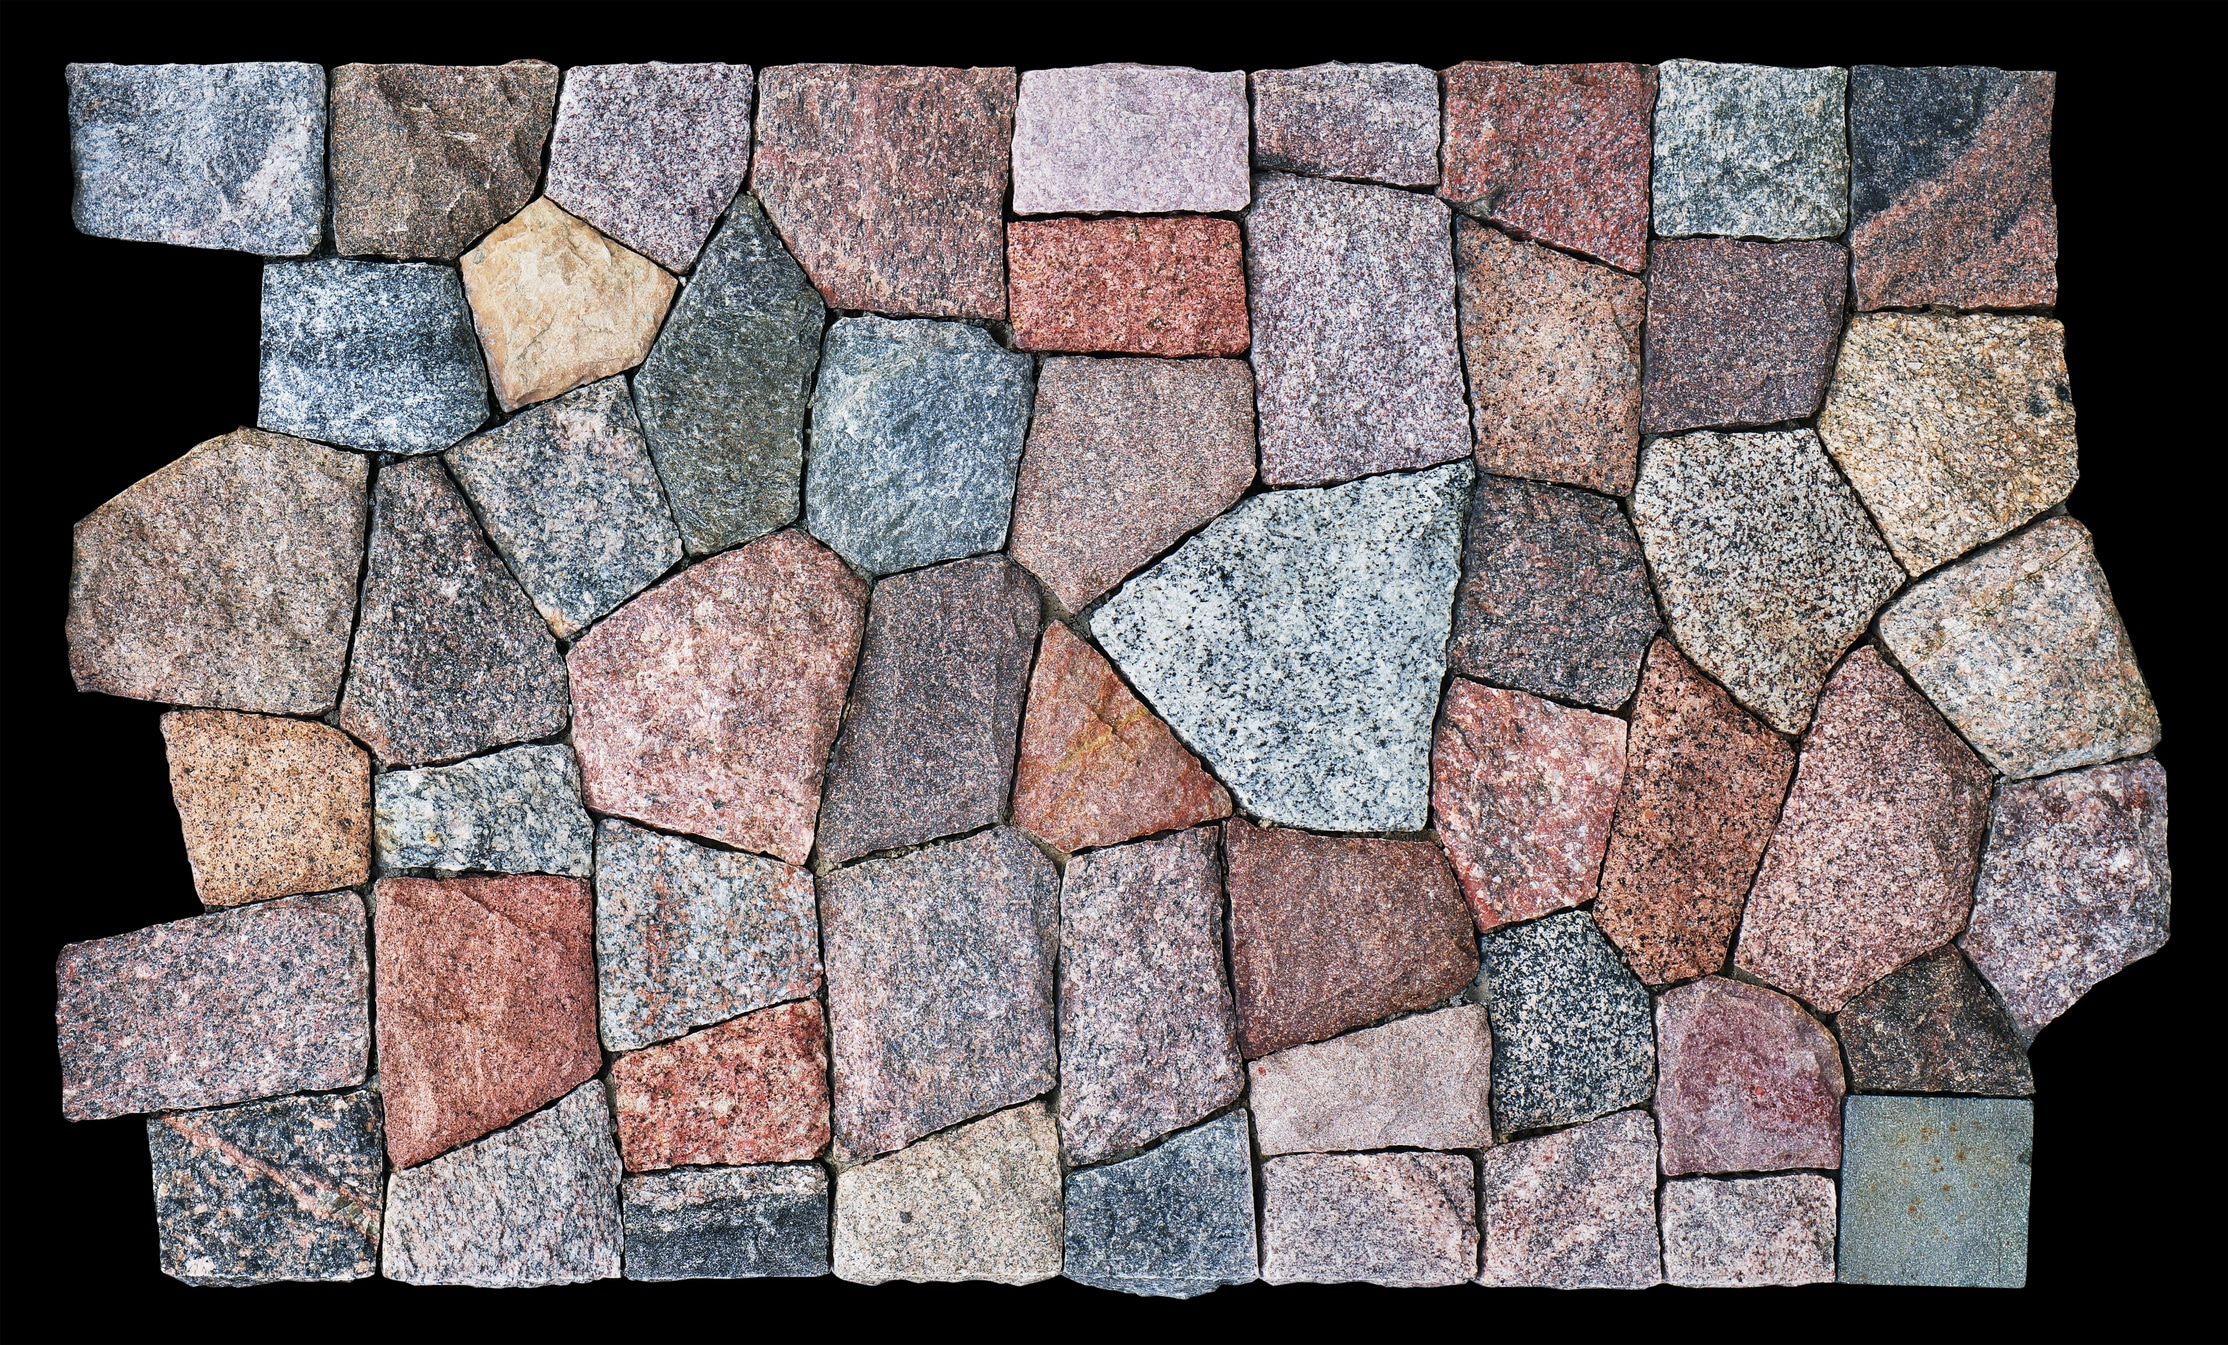 The flat panel is decorated with a mosaic from roughly processed granite polygonal tiles. Isolated on black